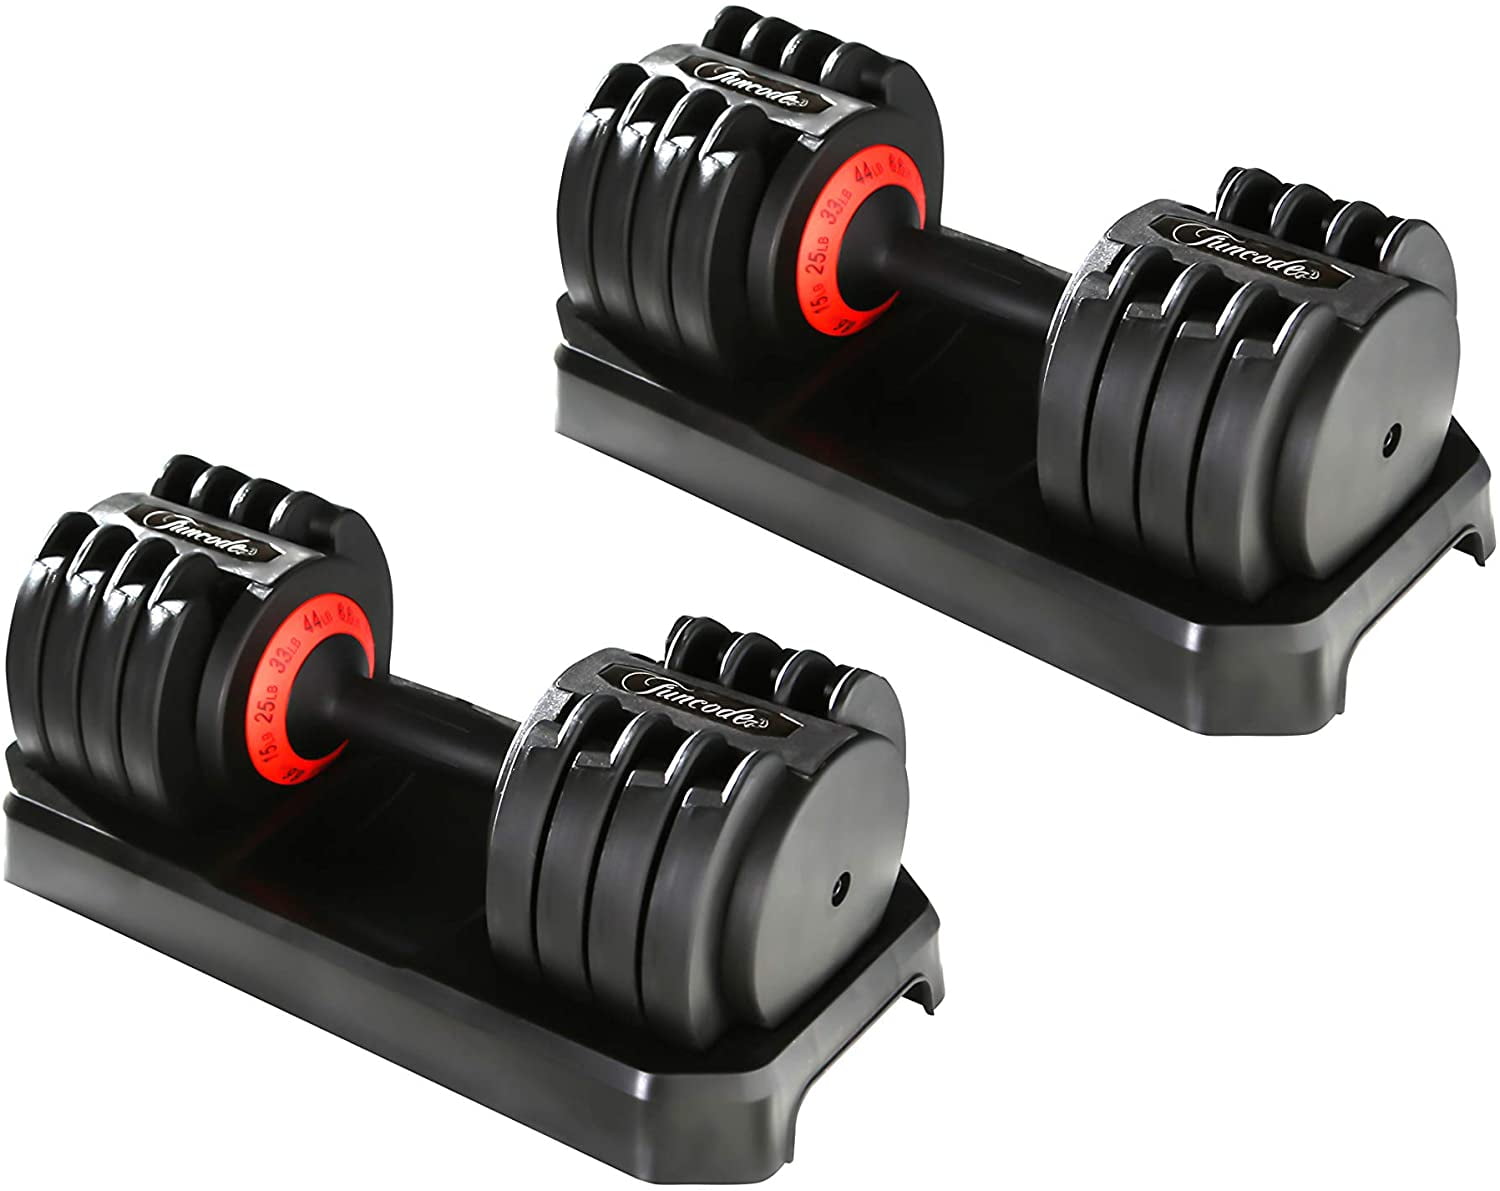 Adjustable Dumbbell 6.6-44Lbs Weight Five Options Anti-Slip Handle Single One 